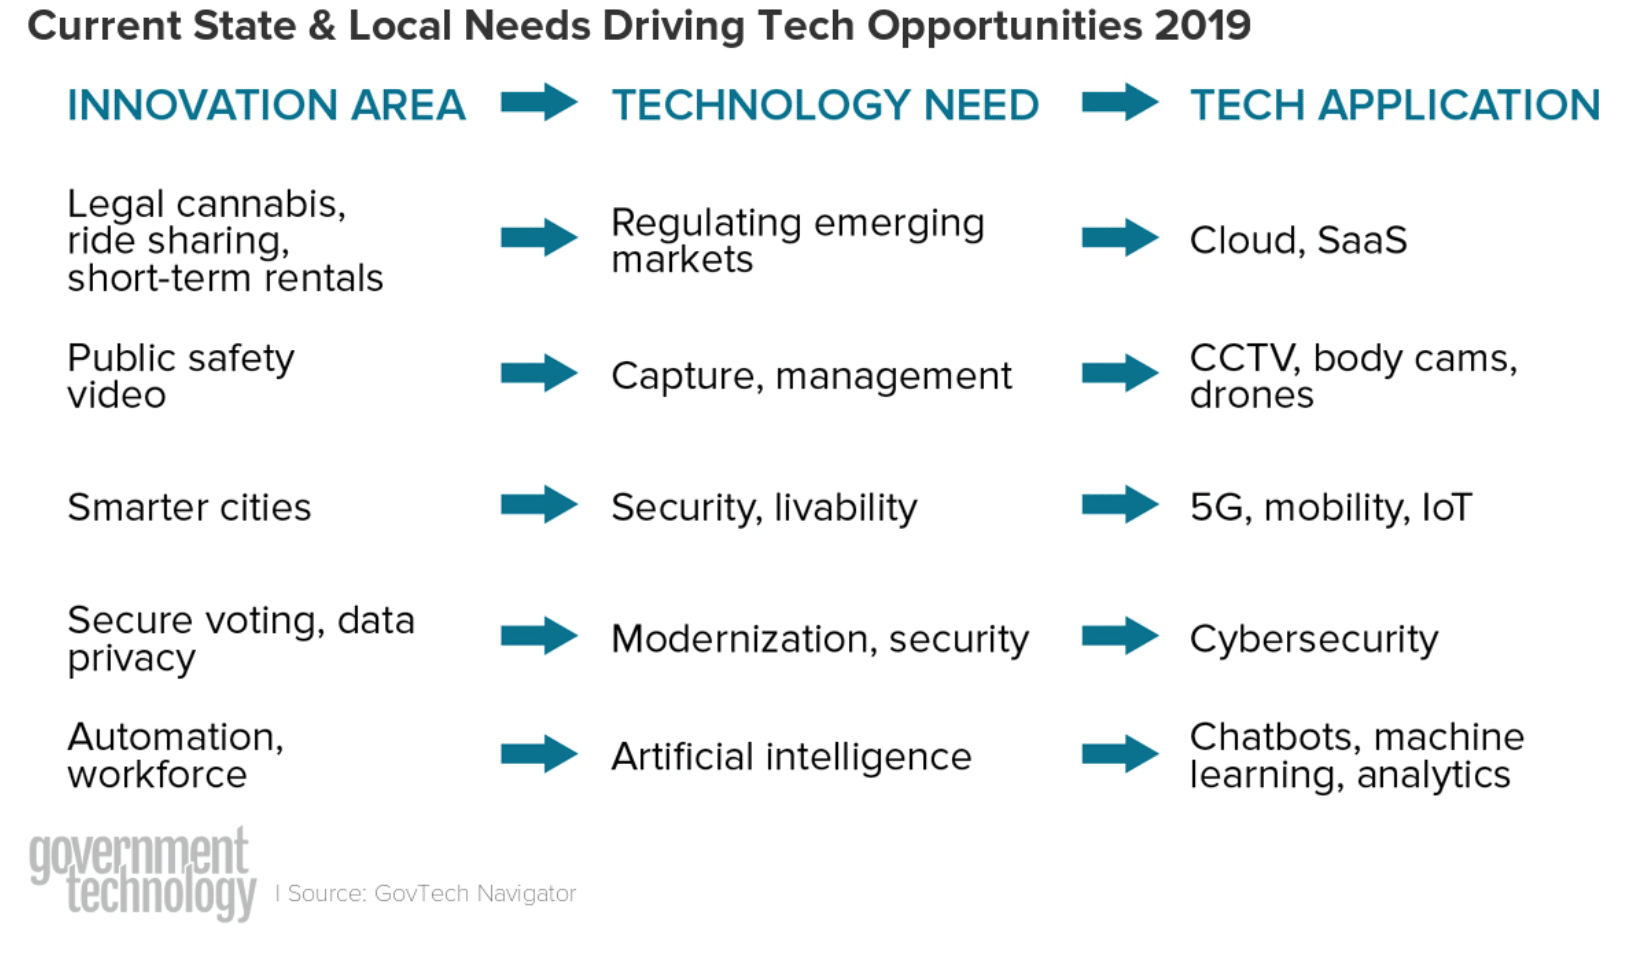 Current state and local needs driving GovTech opportunities in 2019